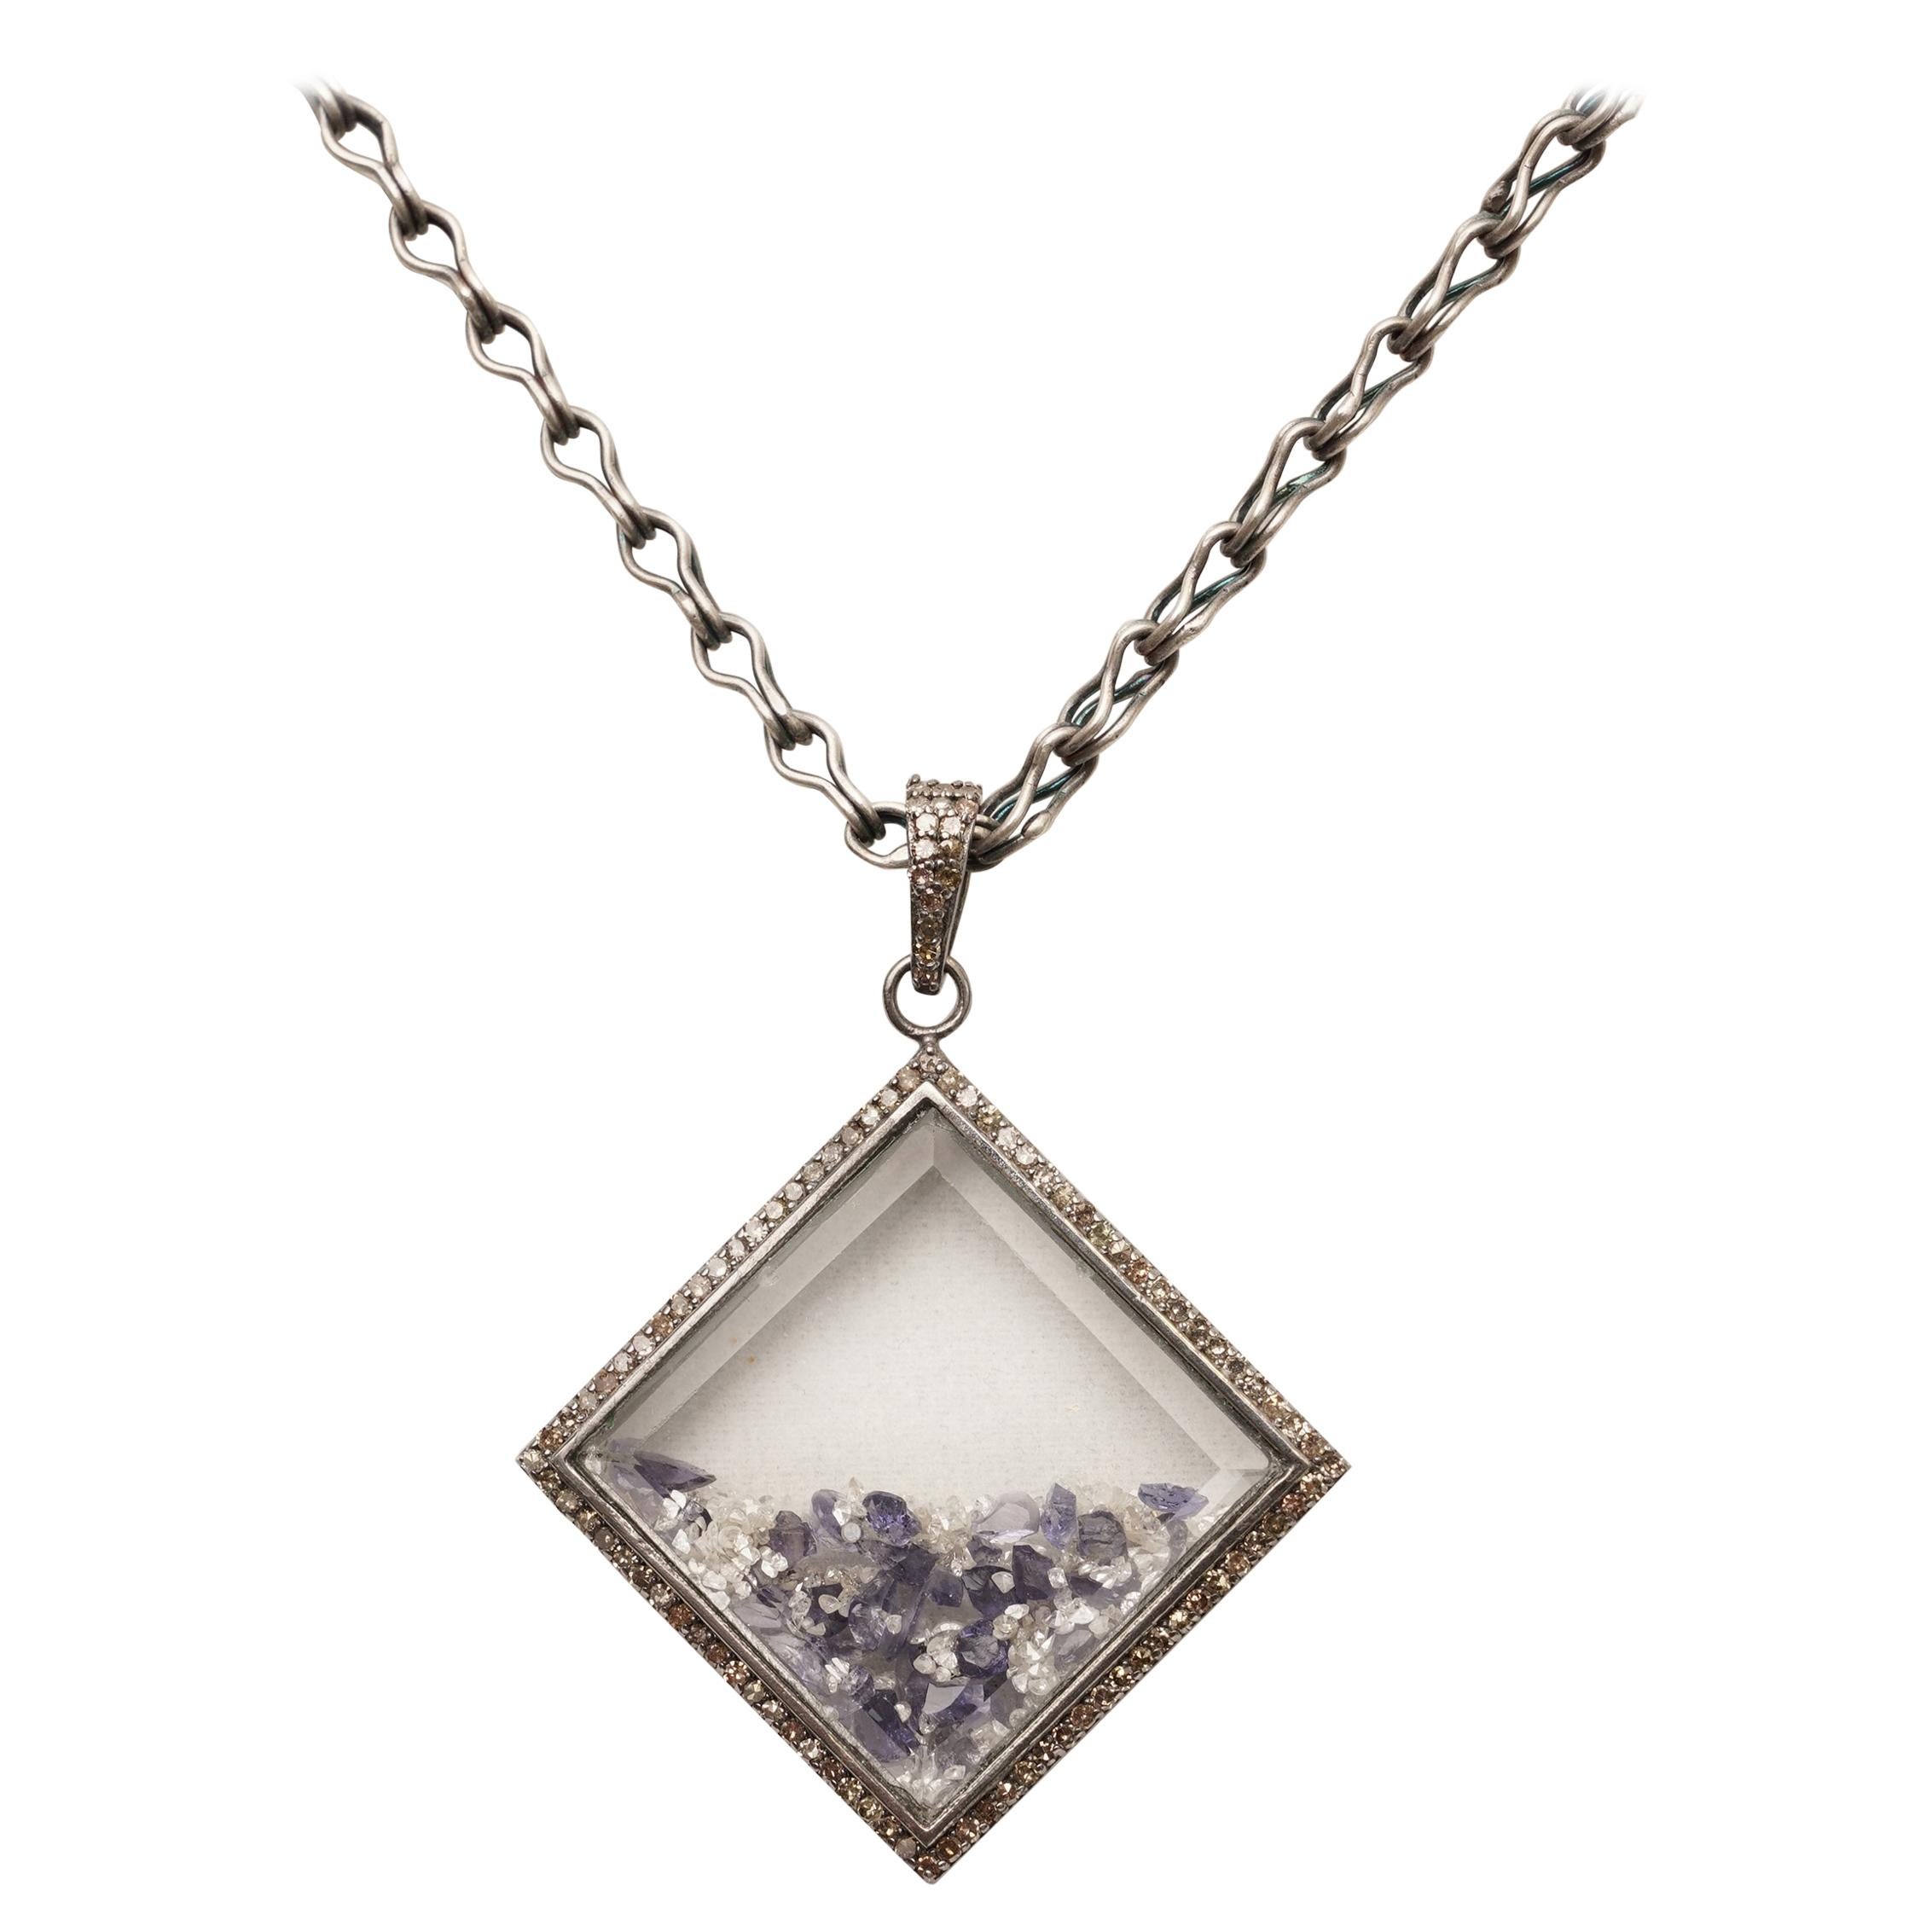 Loose Stones of Diamonds and Iolite in Picture Frame Pendant on Long Chain